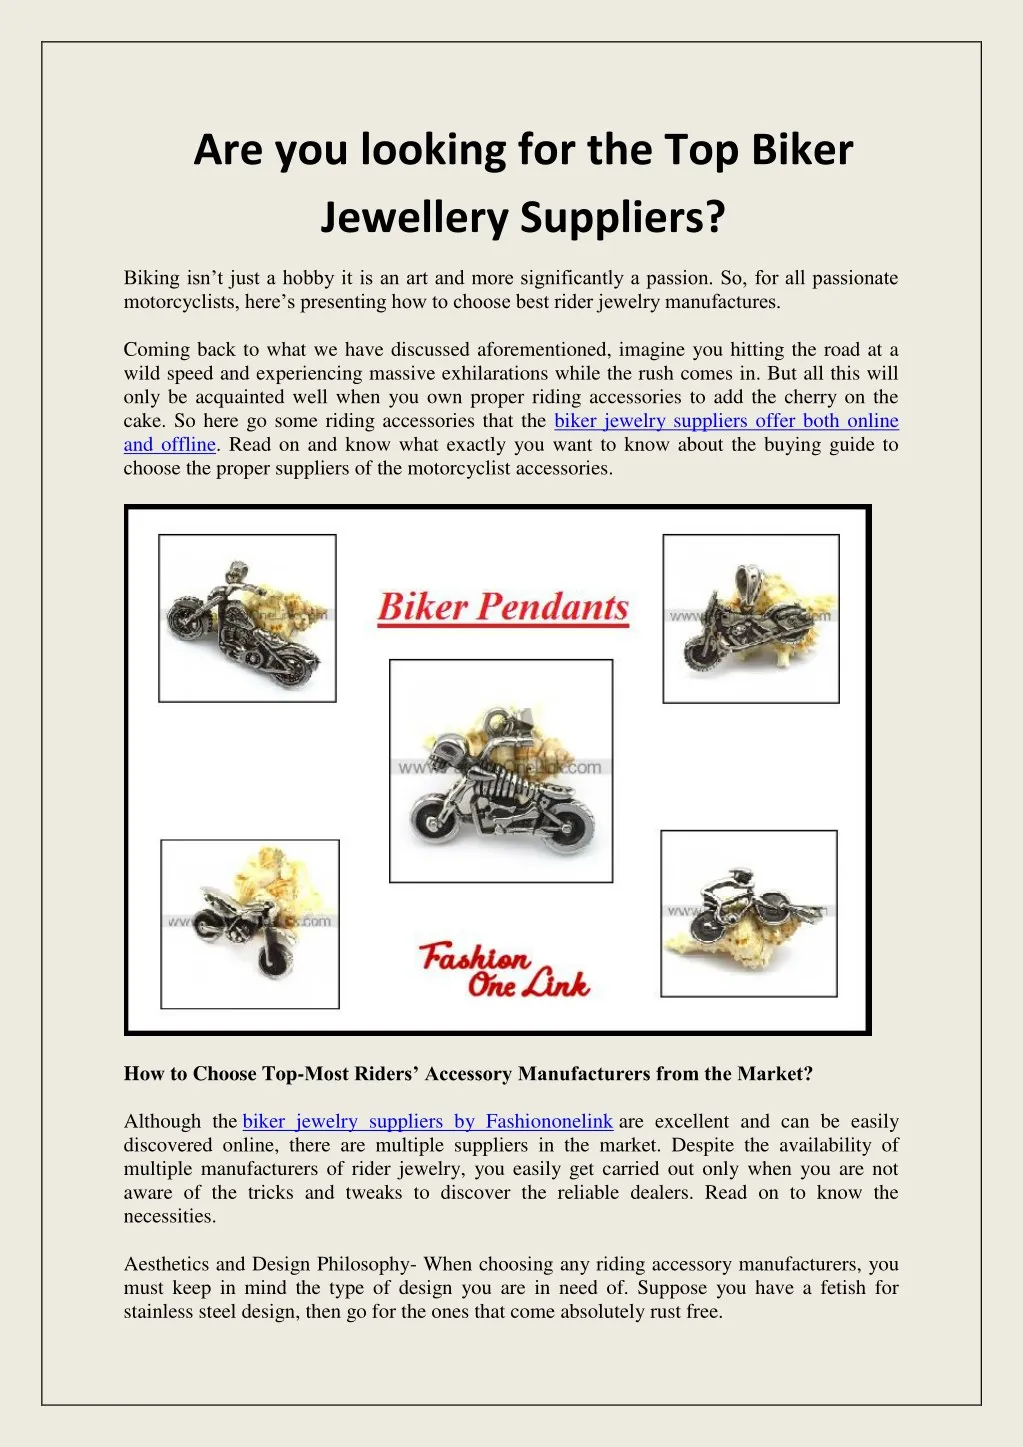 are you looking for the top biker jewellery